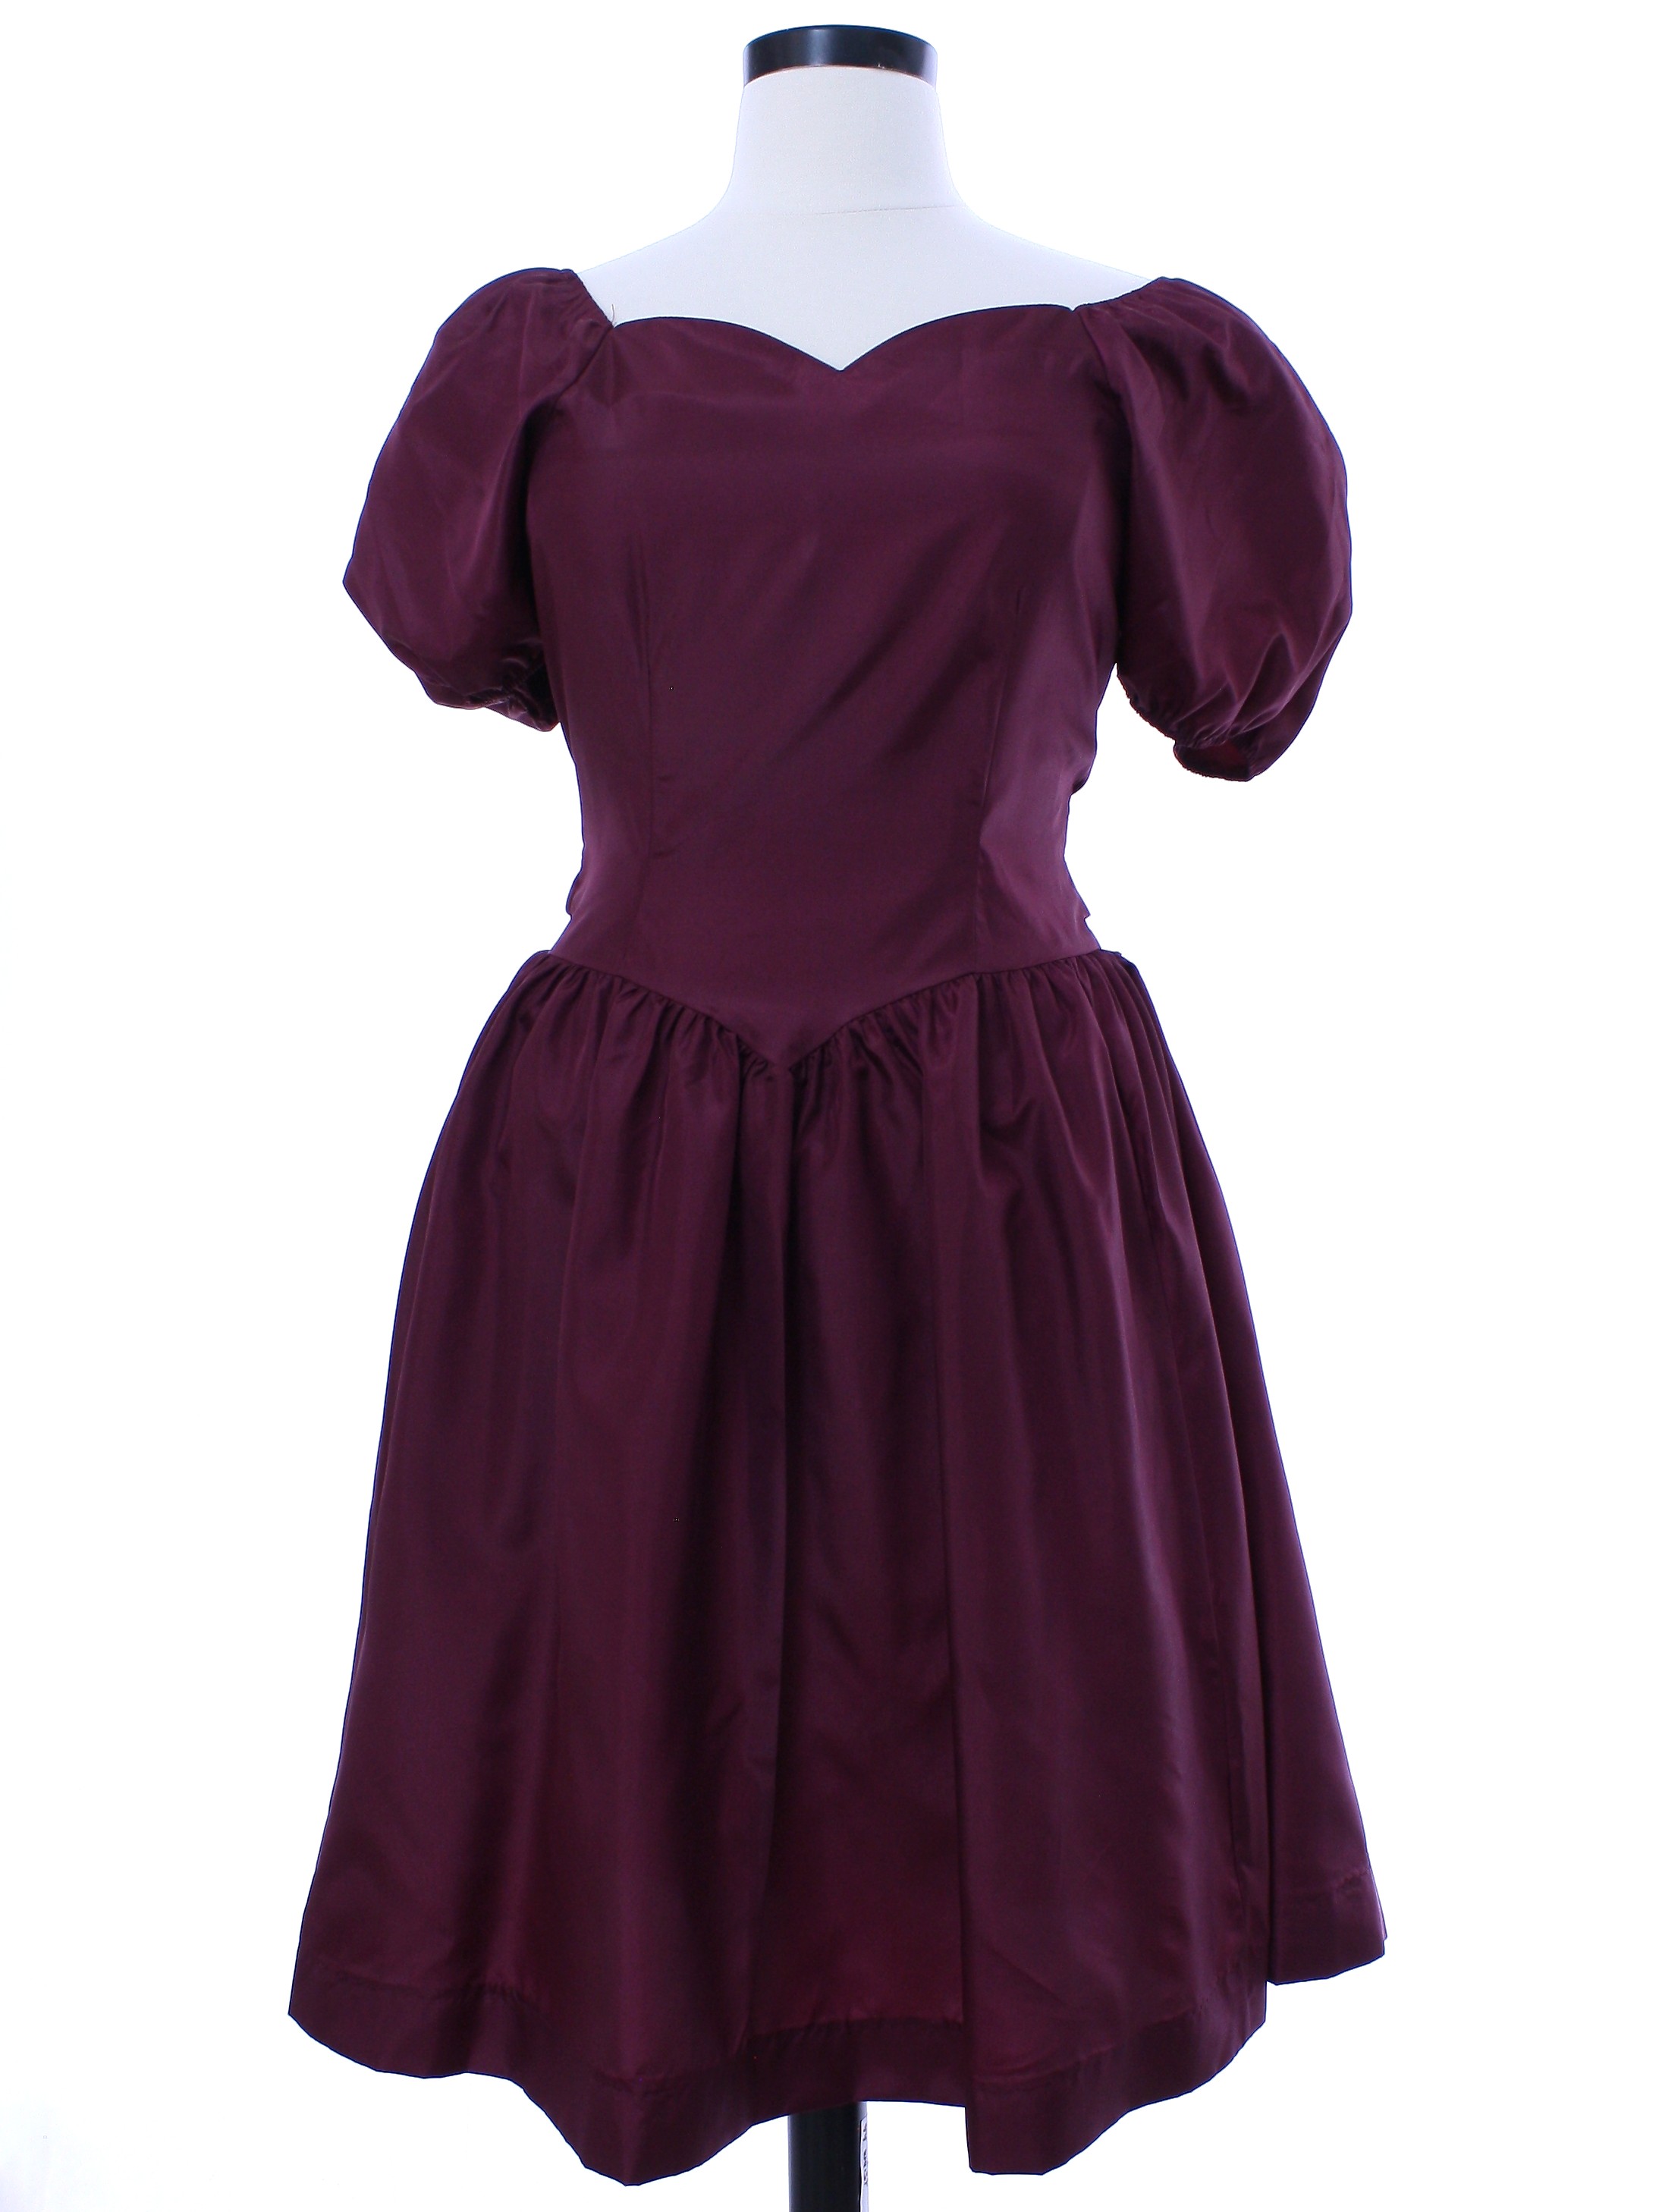 Retro 1980s Cocktail Dress: Early 80s -Formal Fashions- Womens maroon ...